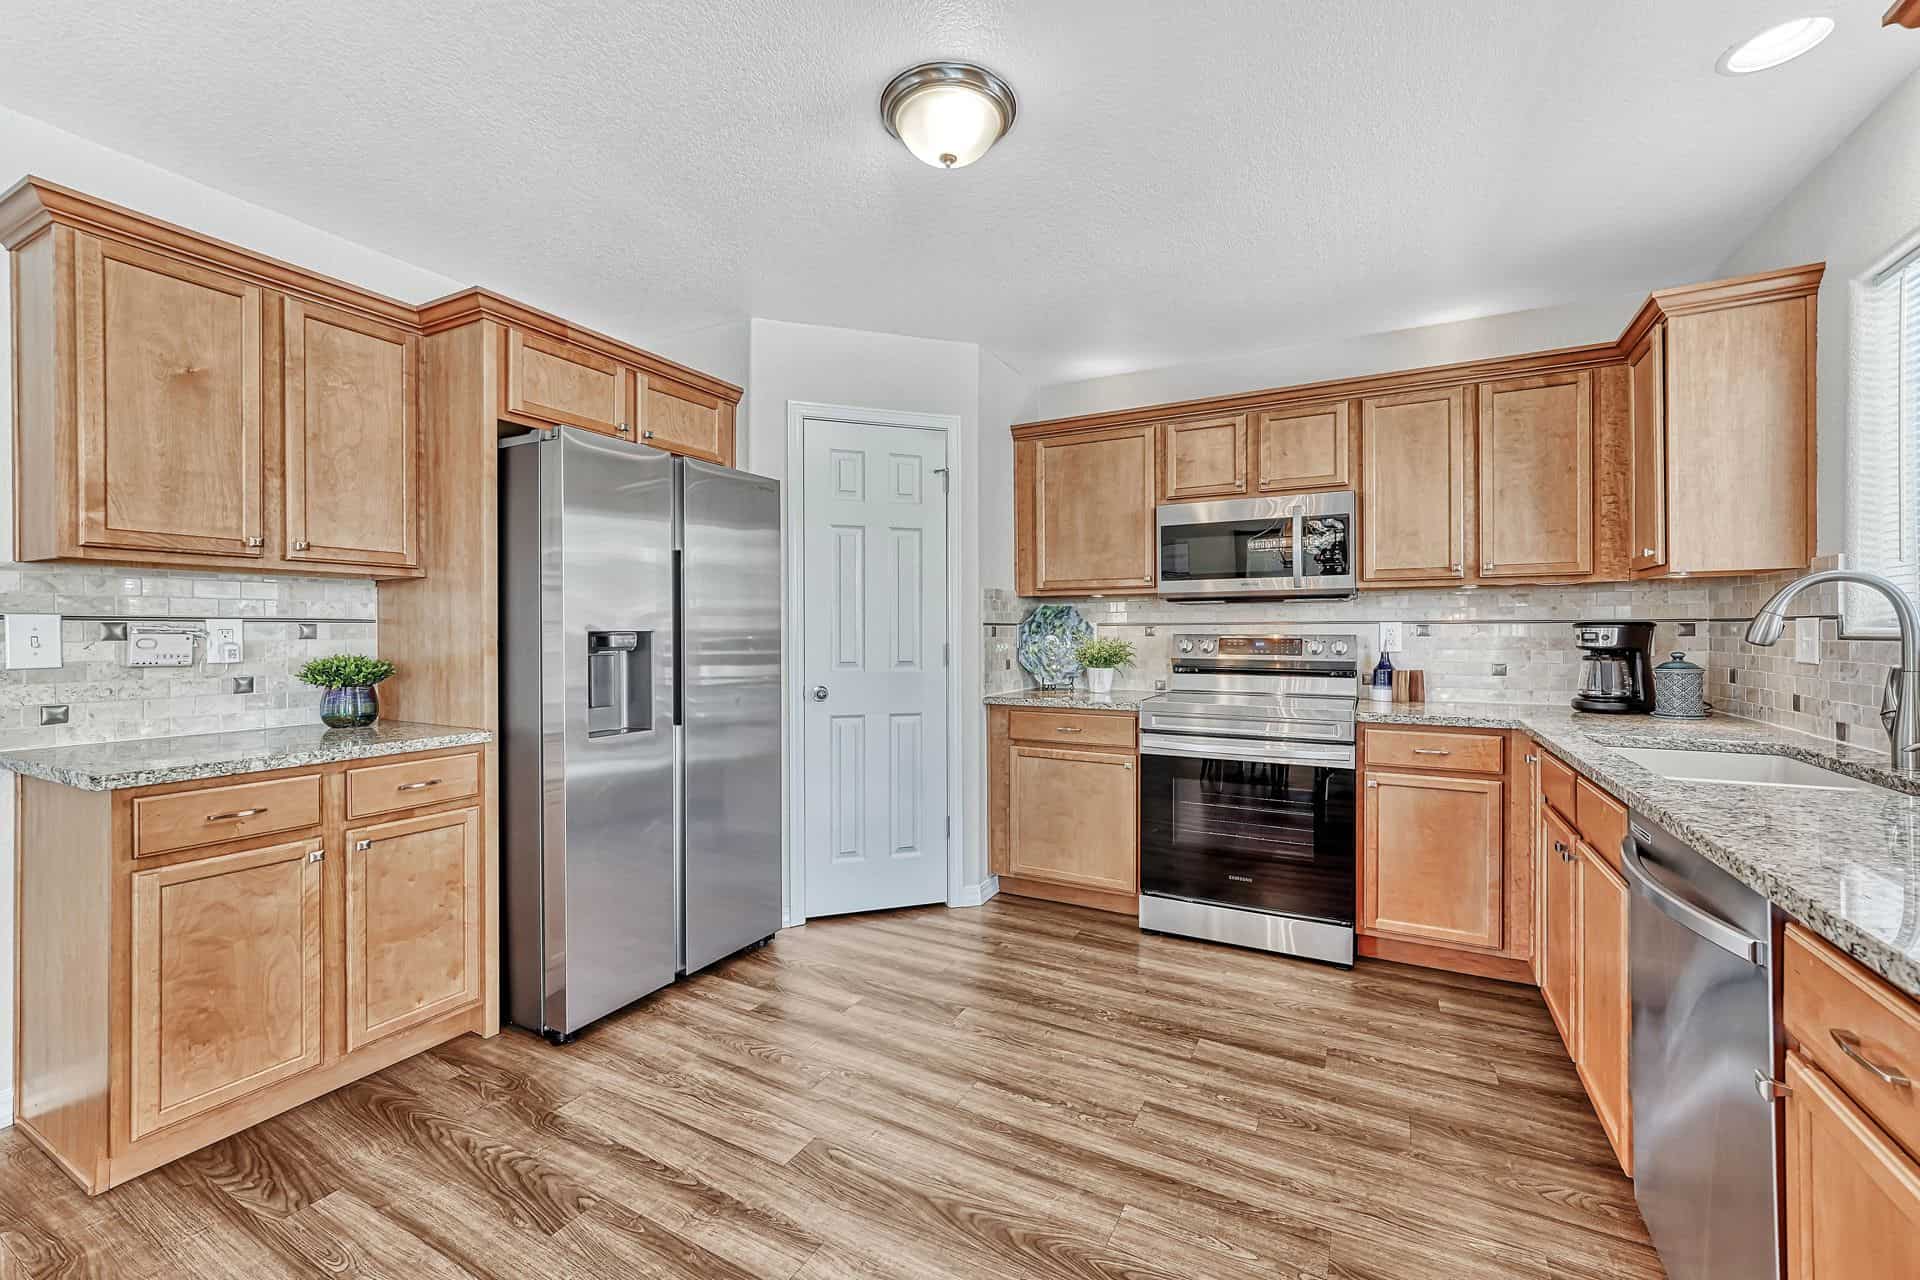 Gourmet Kitchen with Walk In Pantry and Stainless Steel Appliances